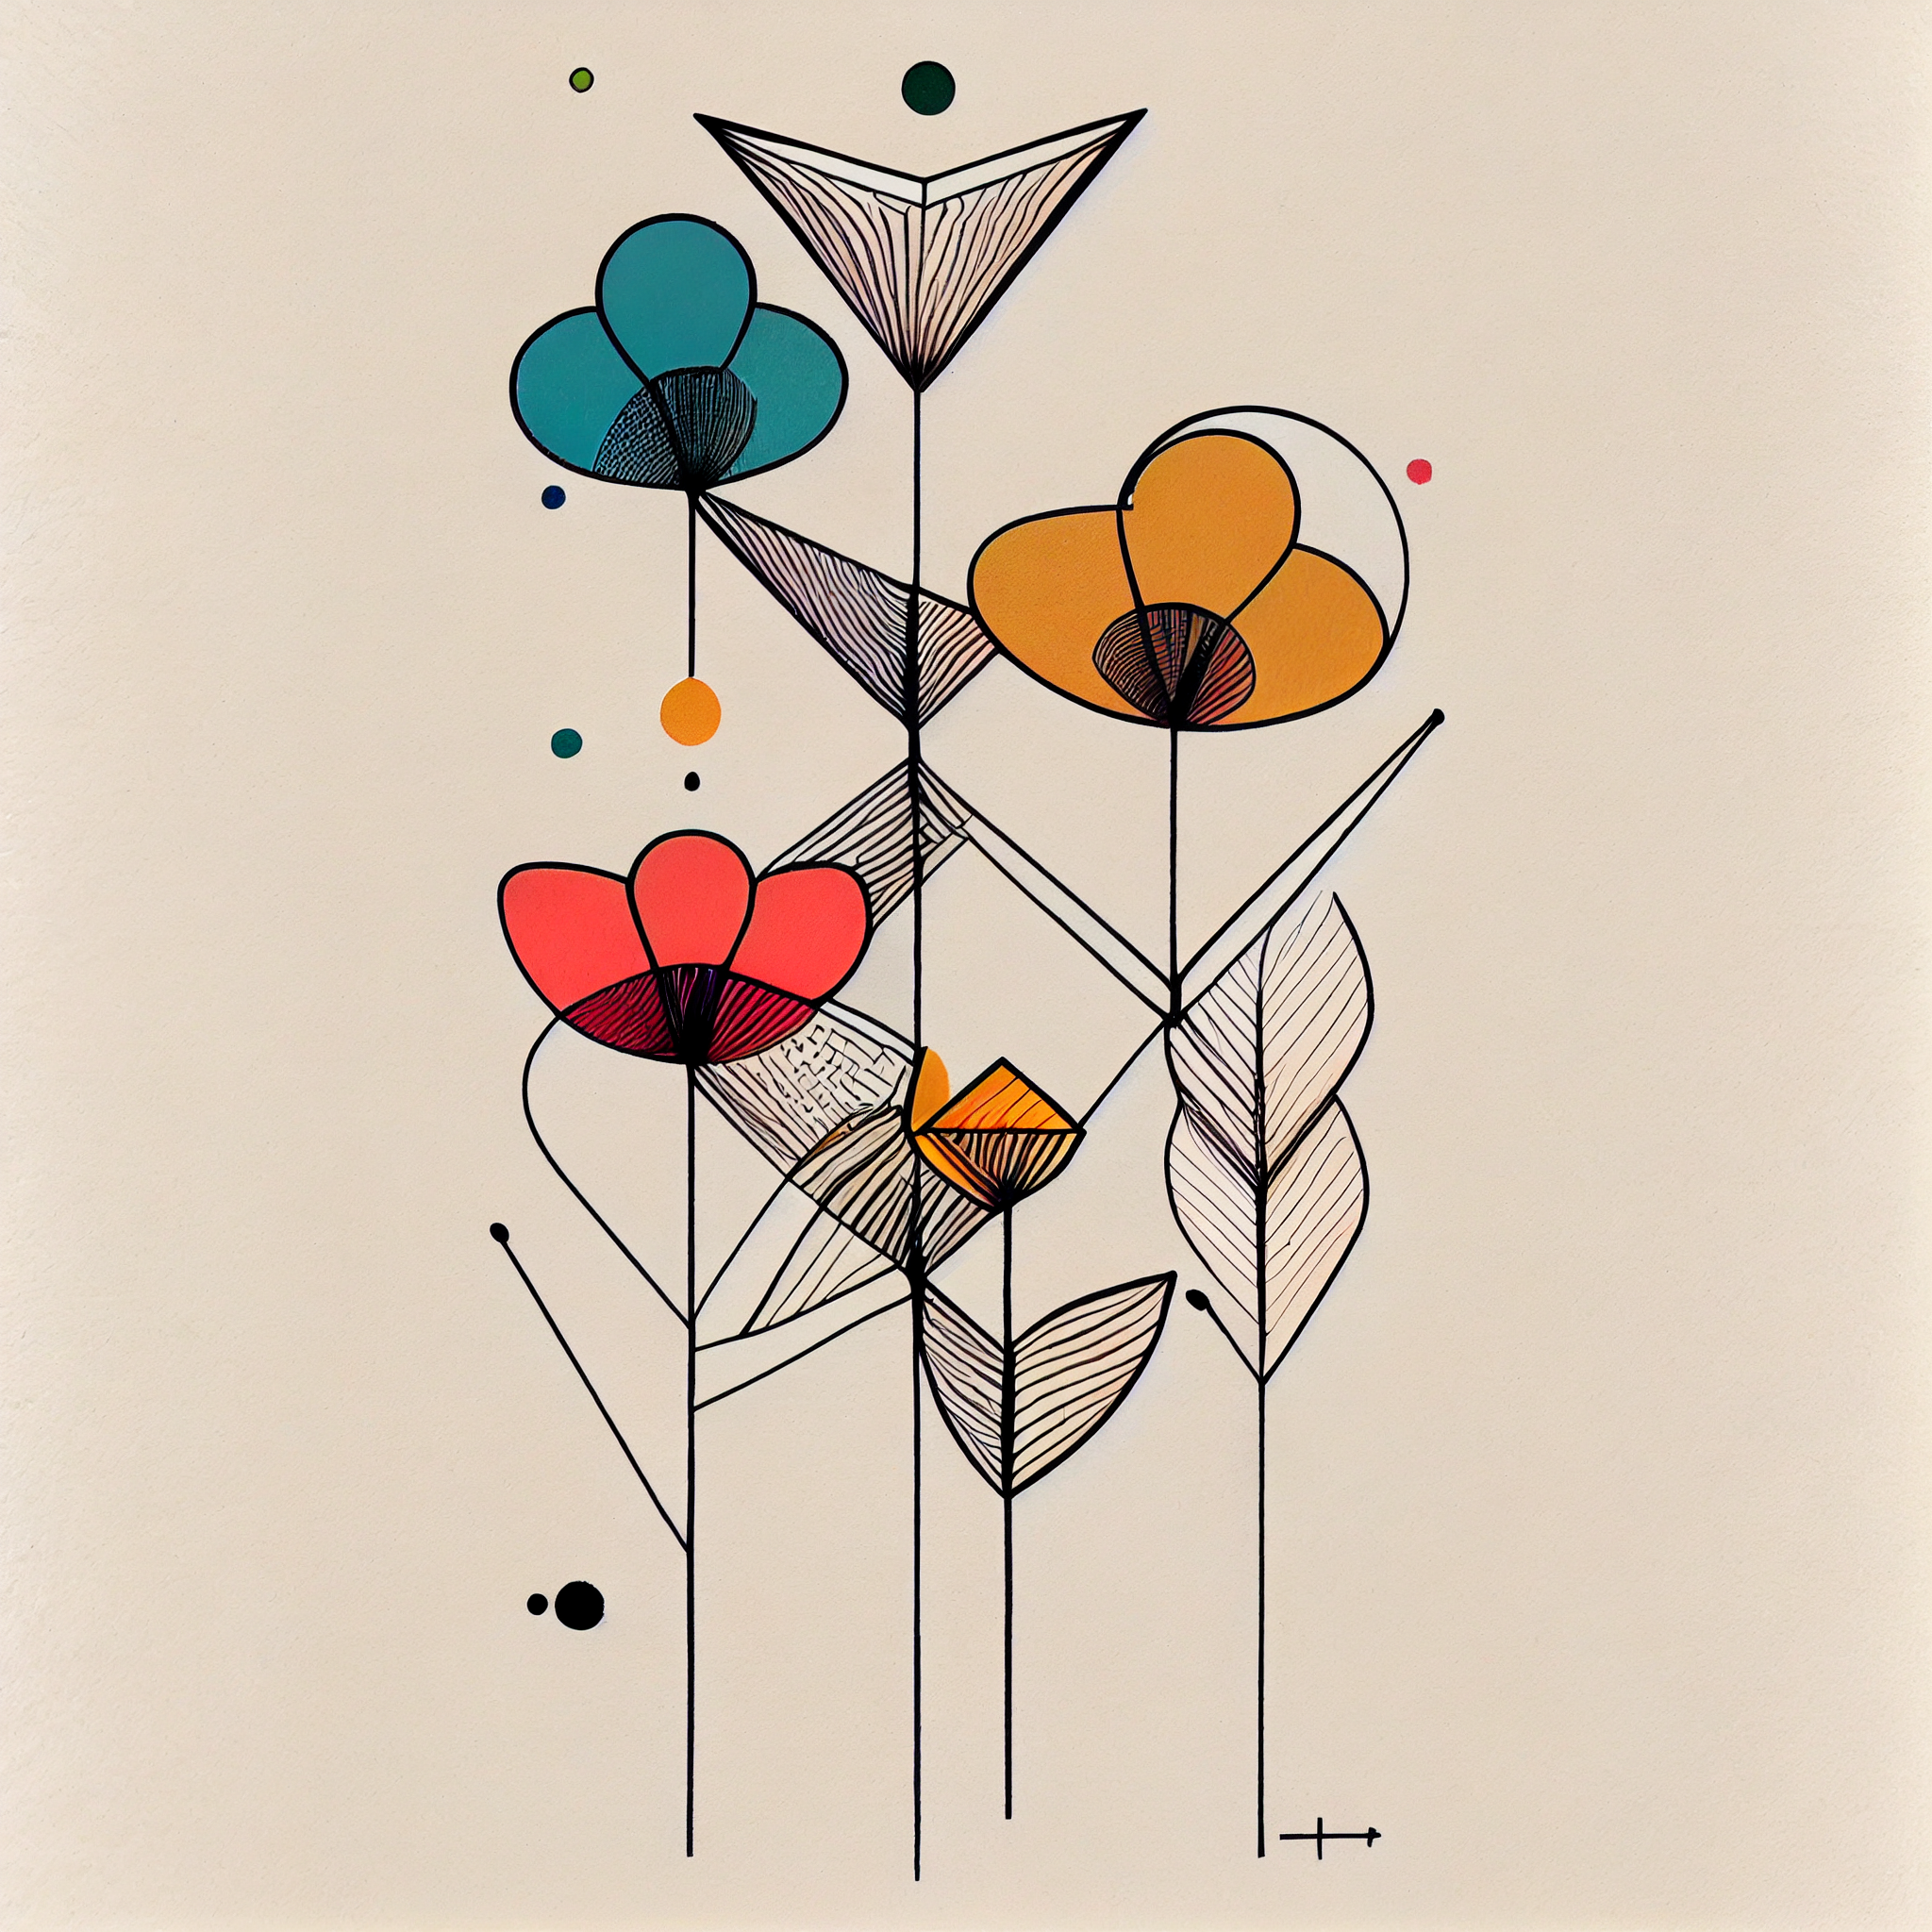 Blossoming Beauty: A Collection of Geometric Flower Art